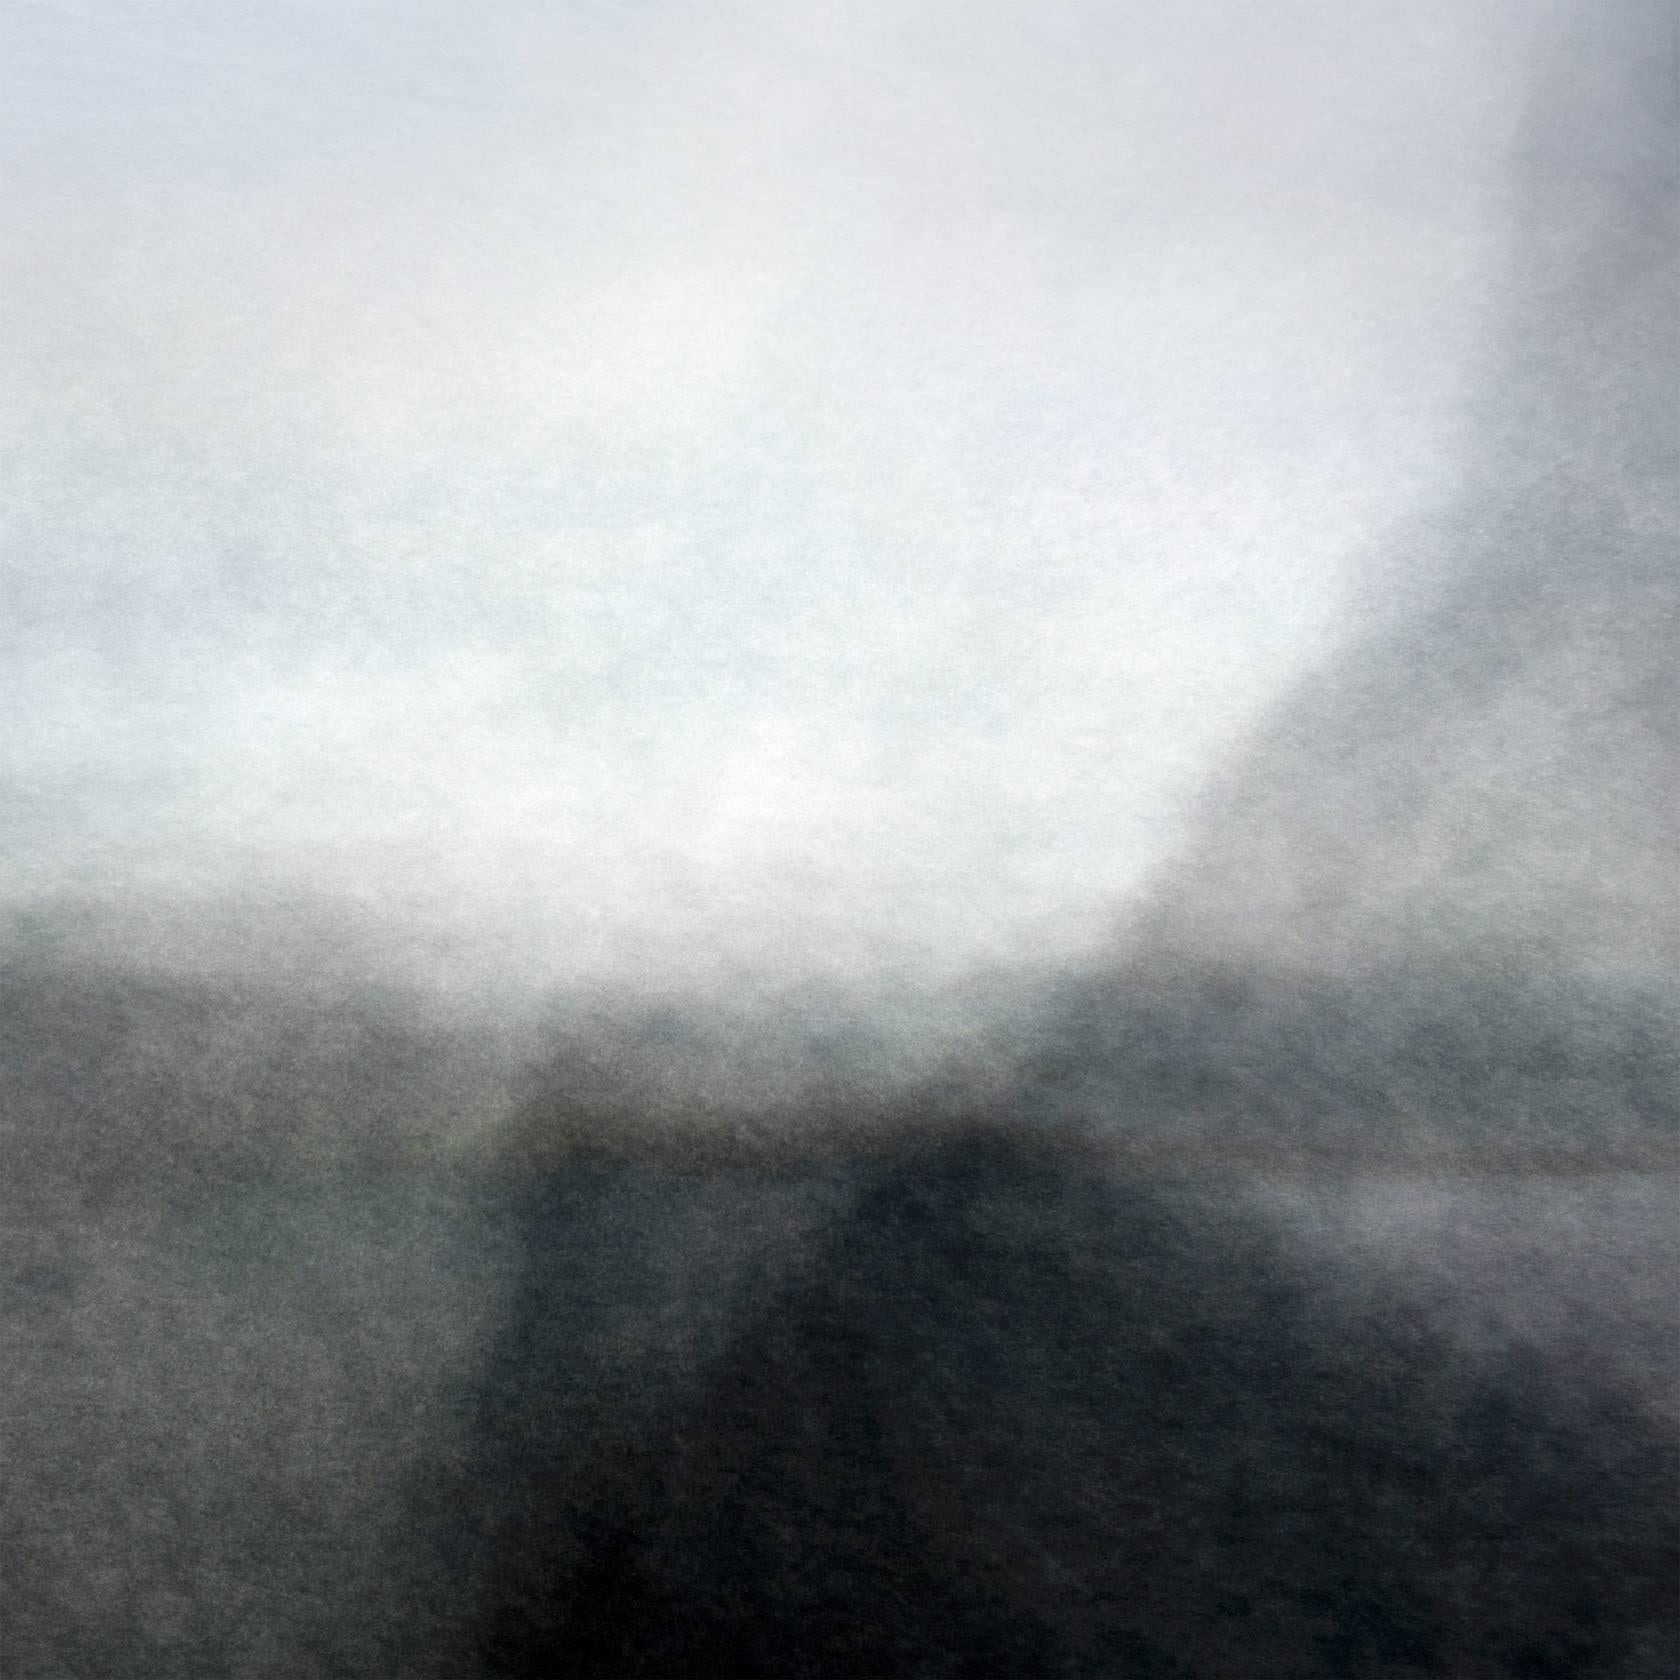 Mariette Roodenburg Abstract Photograph - A quiet world of mist, abstract photograph on fine art paper